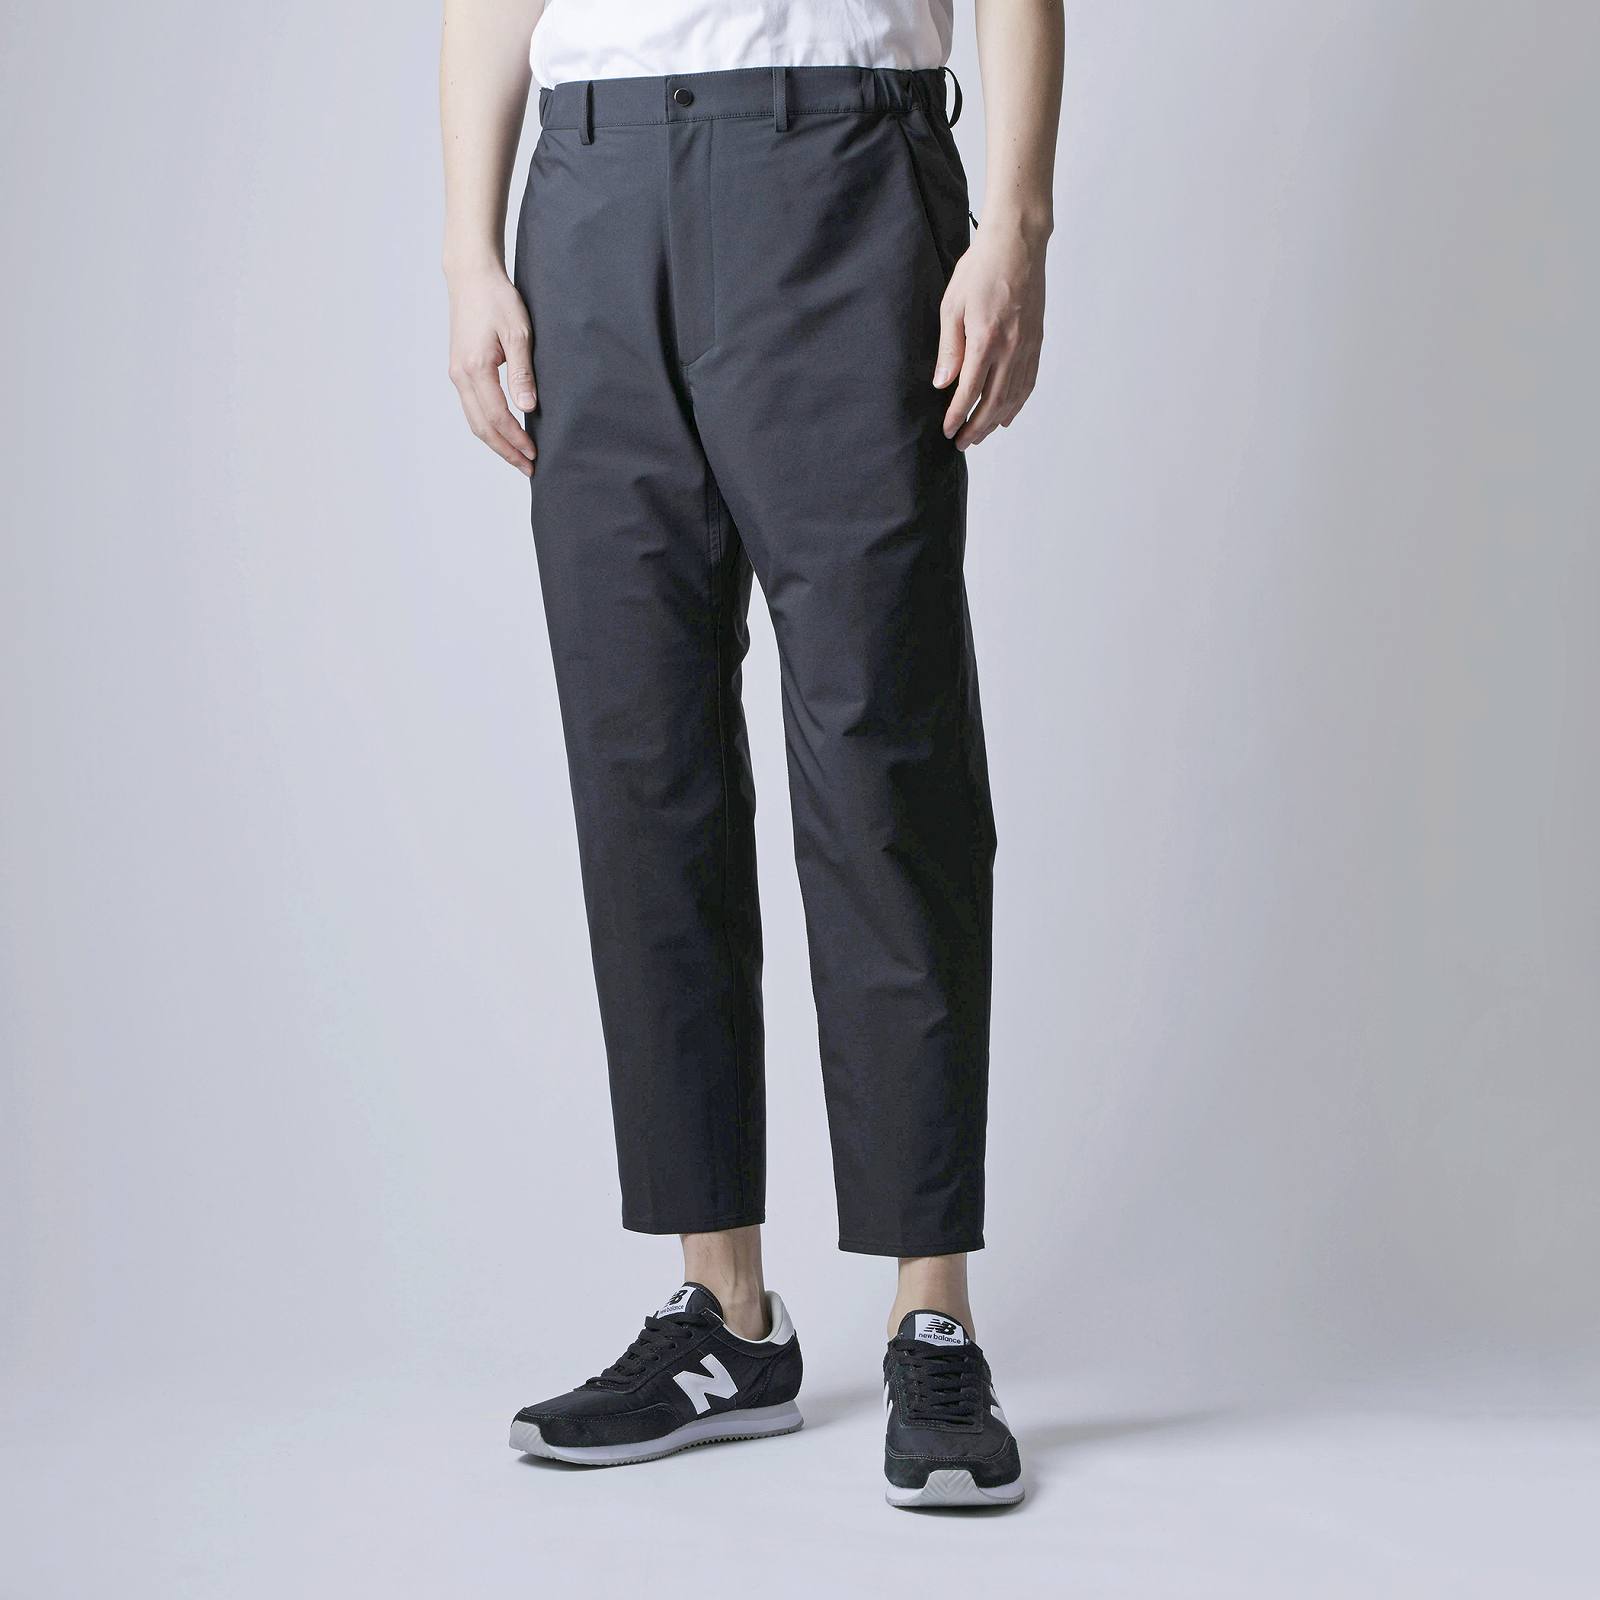 NB公式アウトレット】ニューバランス | Met24 SLIM TAPERED FIT|New 